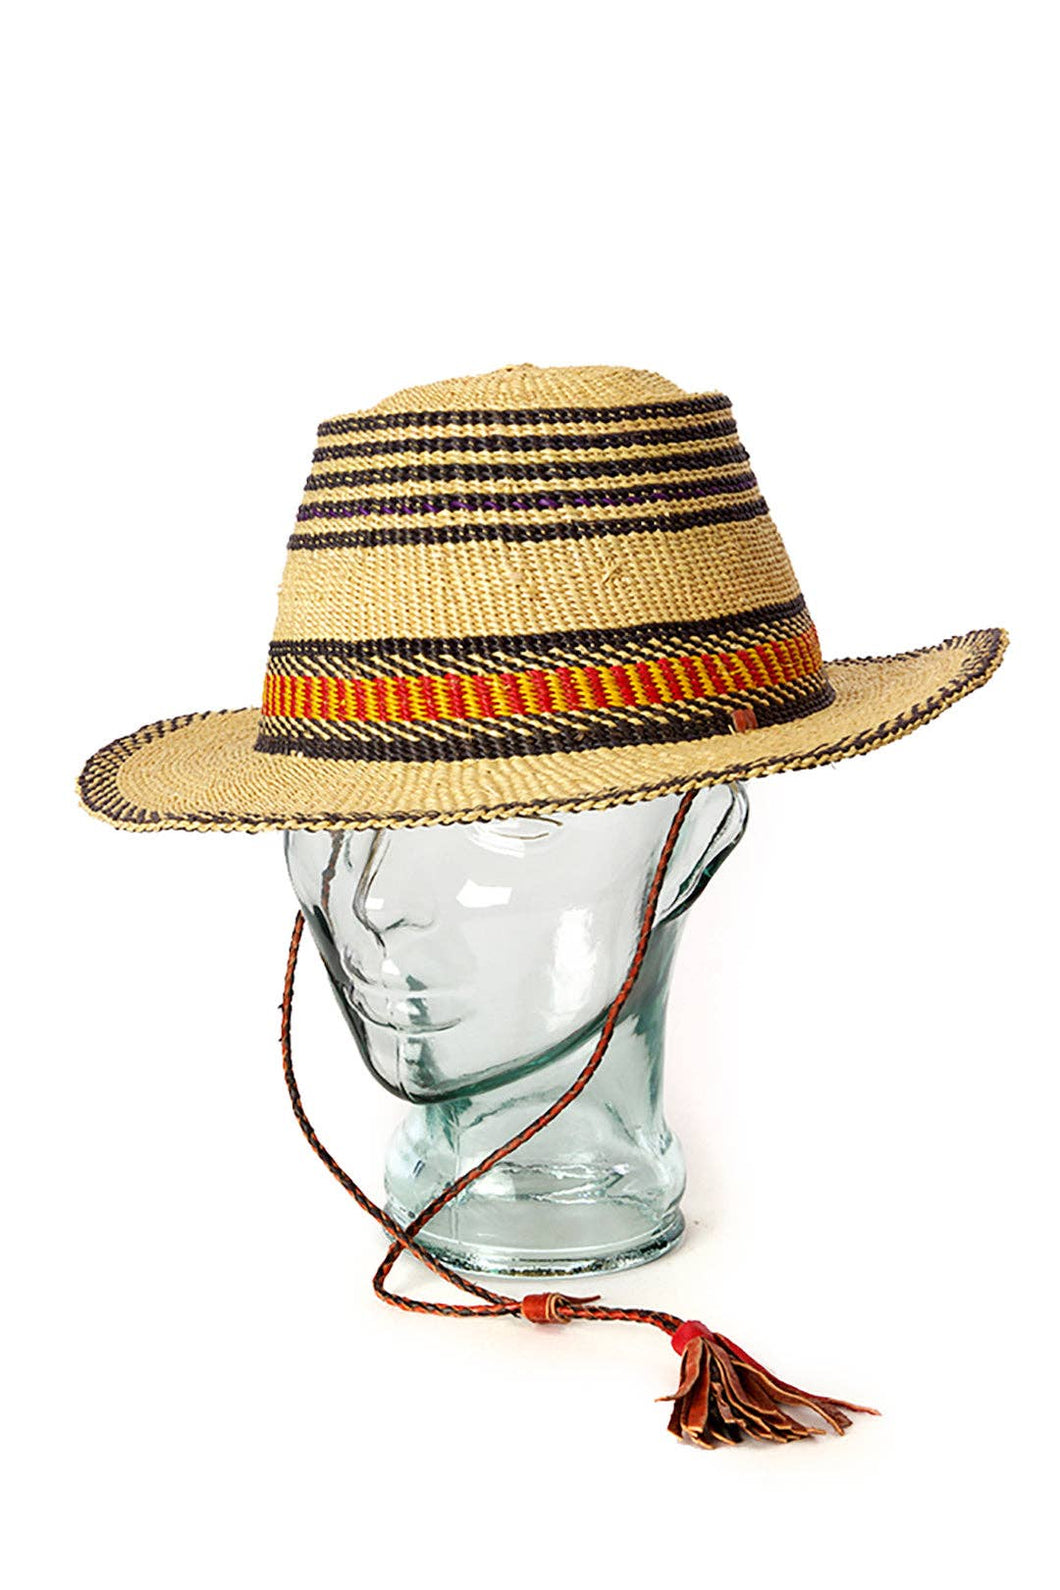 Assorted Short Brimmed Ghanaian Straw Hat with Leather Strap